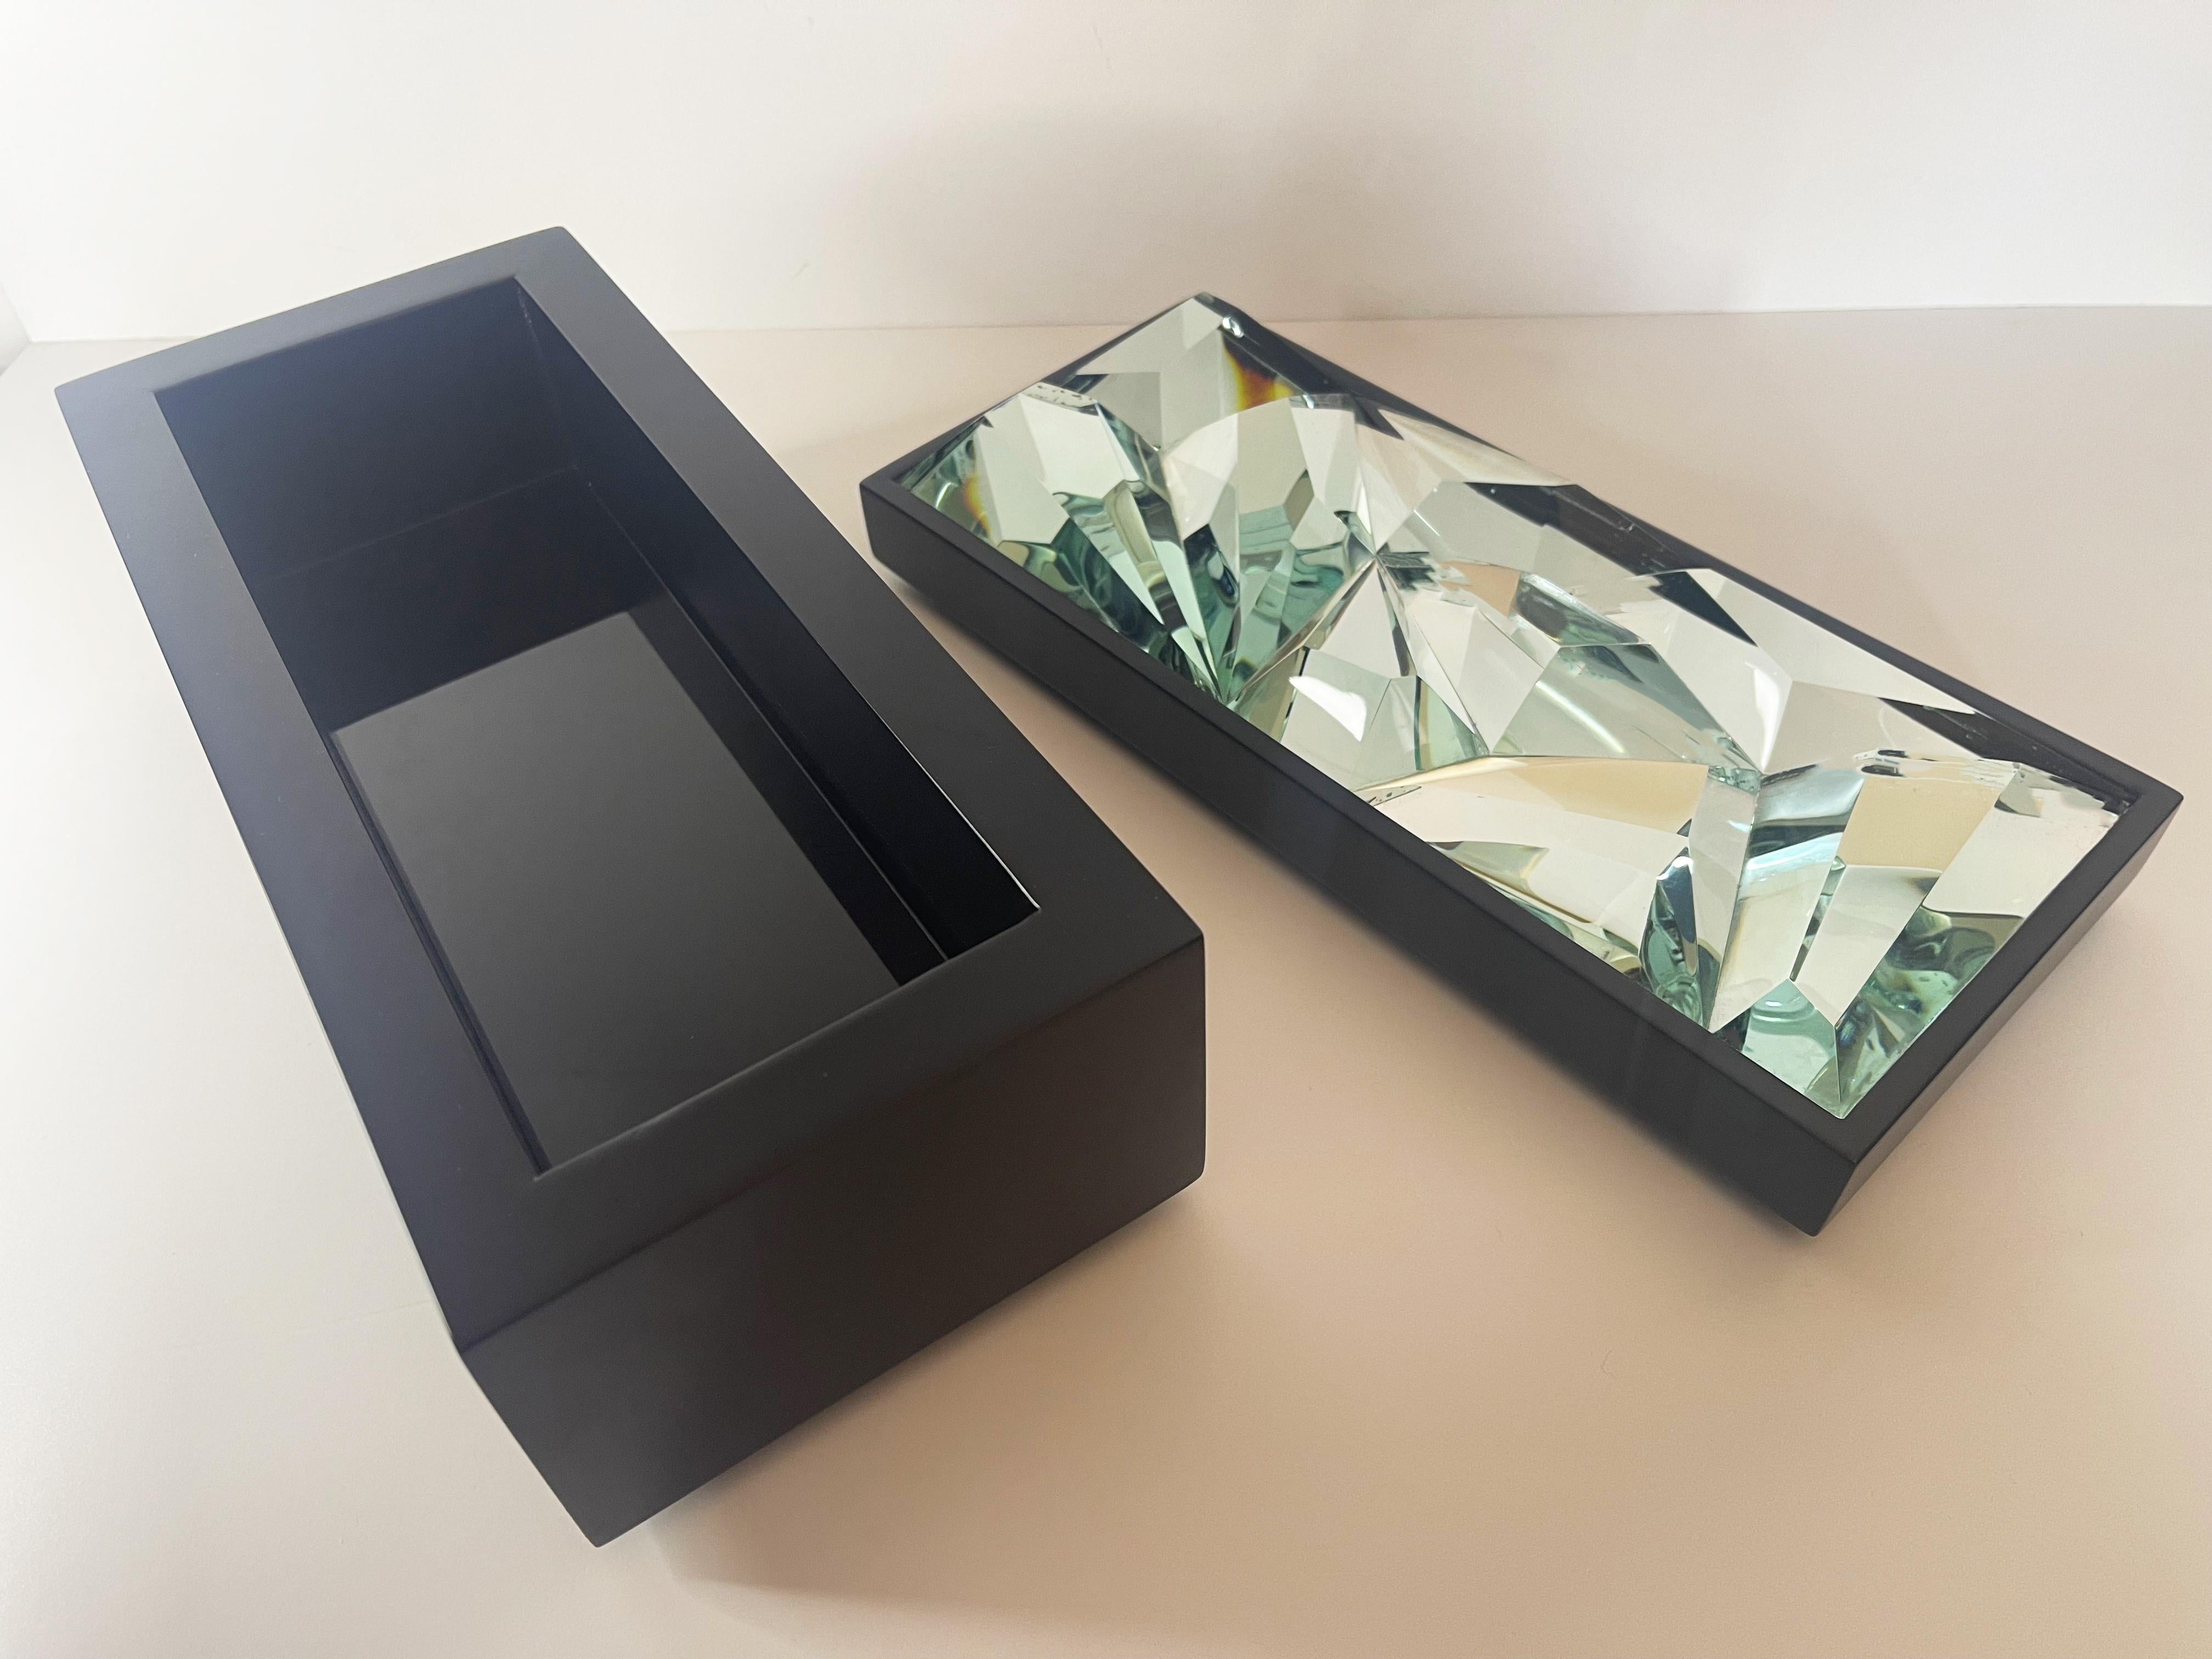 Contemporary 'Pixel' Jewelry Box Handmade Black Wood and Glass by Ghirò Studio For Sale 3